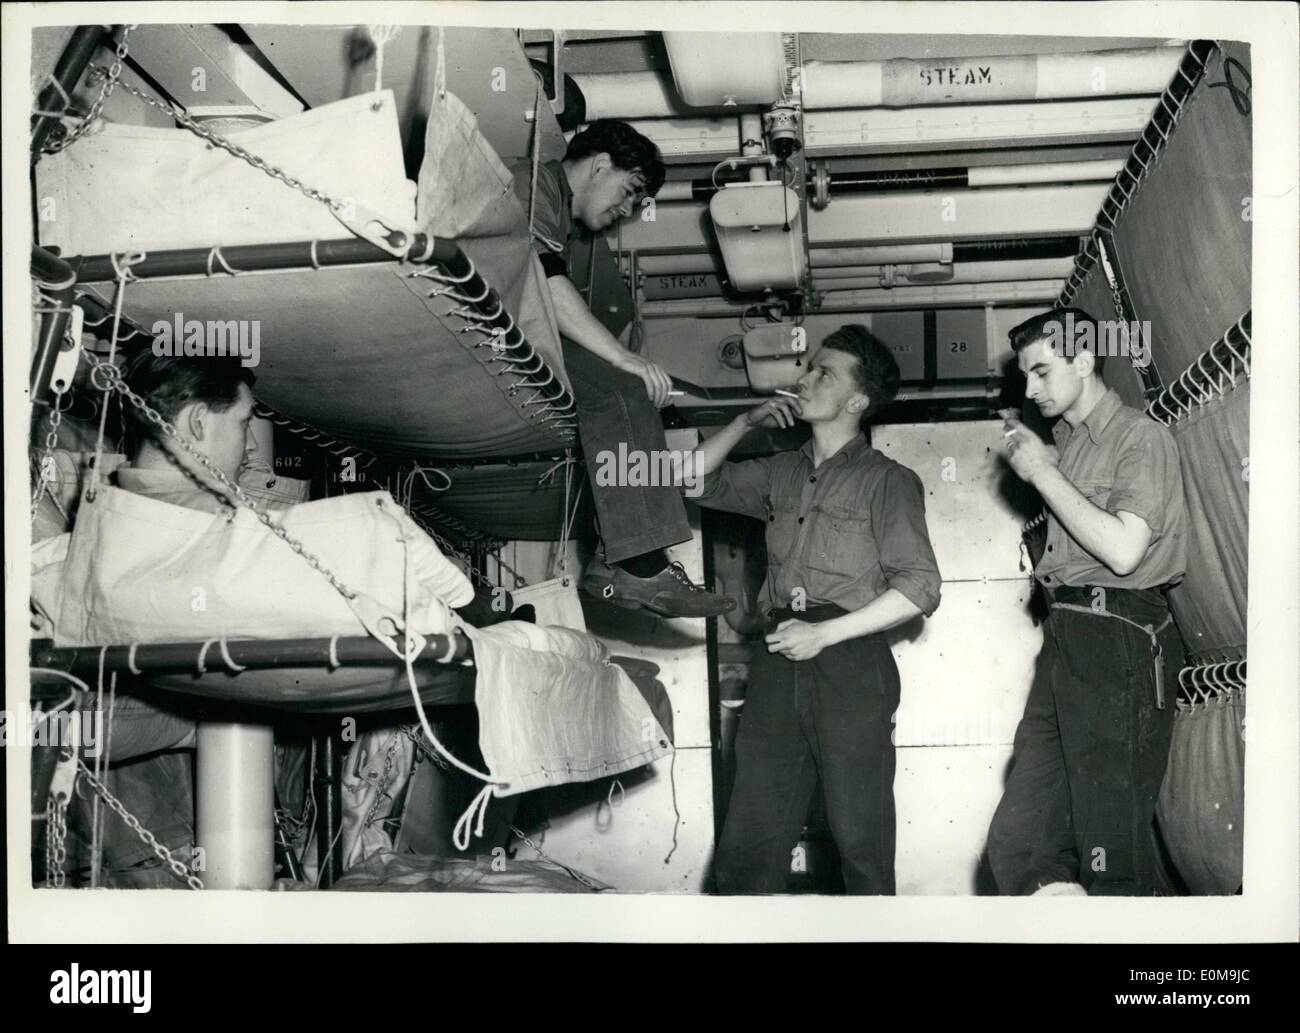 Apr. 04, 1954 - Canvas Bunks take Place of Hammocks in new British Aircraft Carriers.: To improve living conditions of ship's Companies - canvas bunks are to replace the traditional hammock in the two new aircraft carriers the Centaur and Albion. The bunks are so designed that they can be stowed when not in use and the extra space for which 'nests' of tables are provided - can be used for recreational purposes. Photo shows Scene in the Ordinary Seamen's mess deck - as two A.B's use the canvas bunks as they chat to colleagues whos bunks are stacked alongside the wall - aboard H.M.S Stock Photo